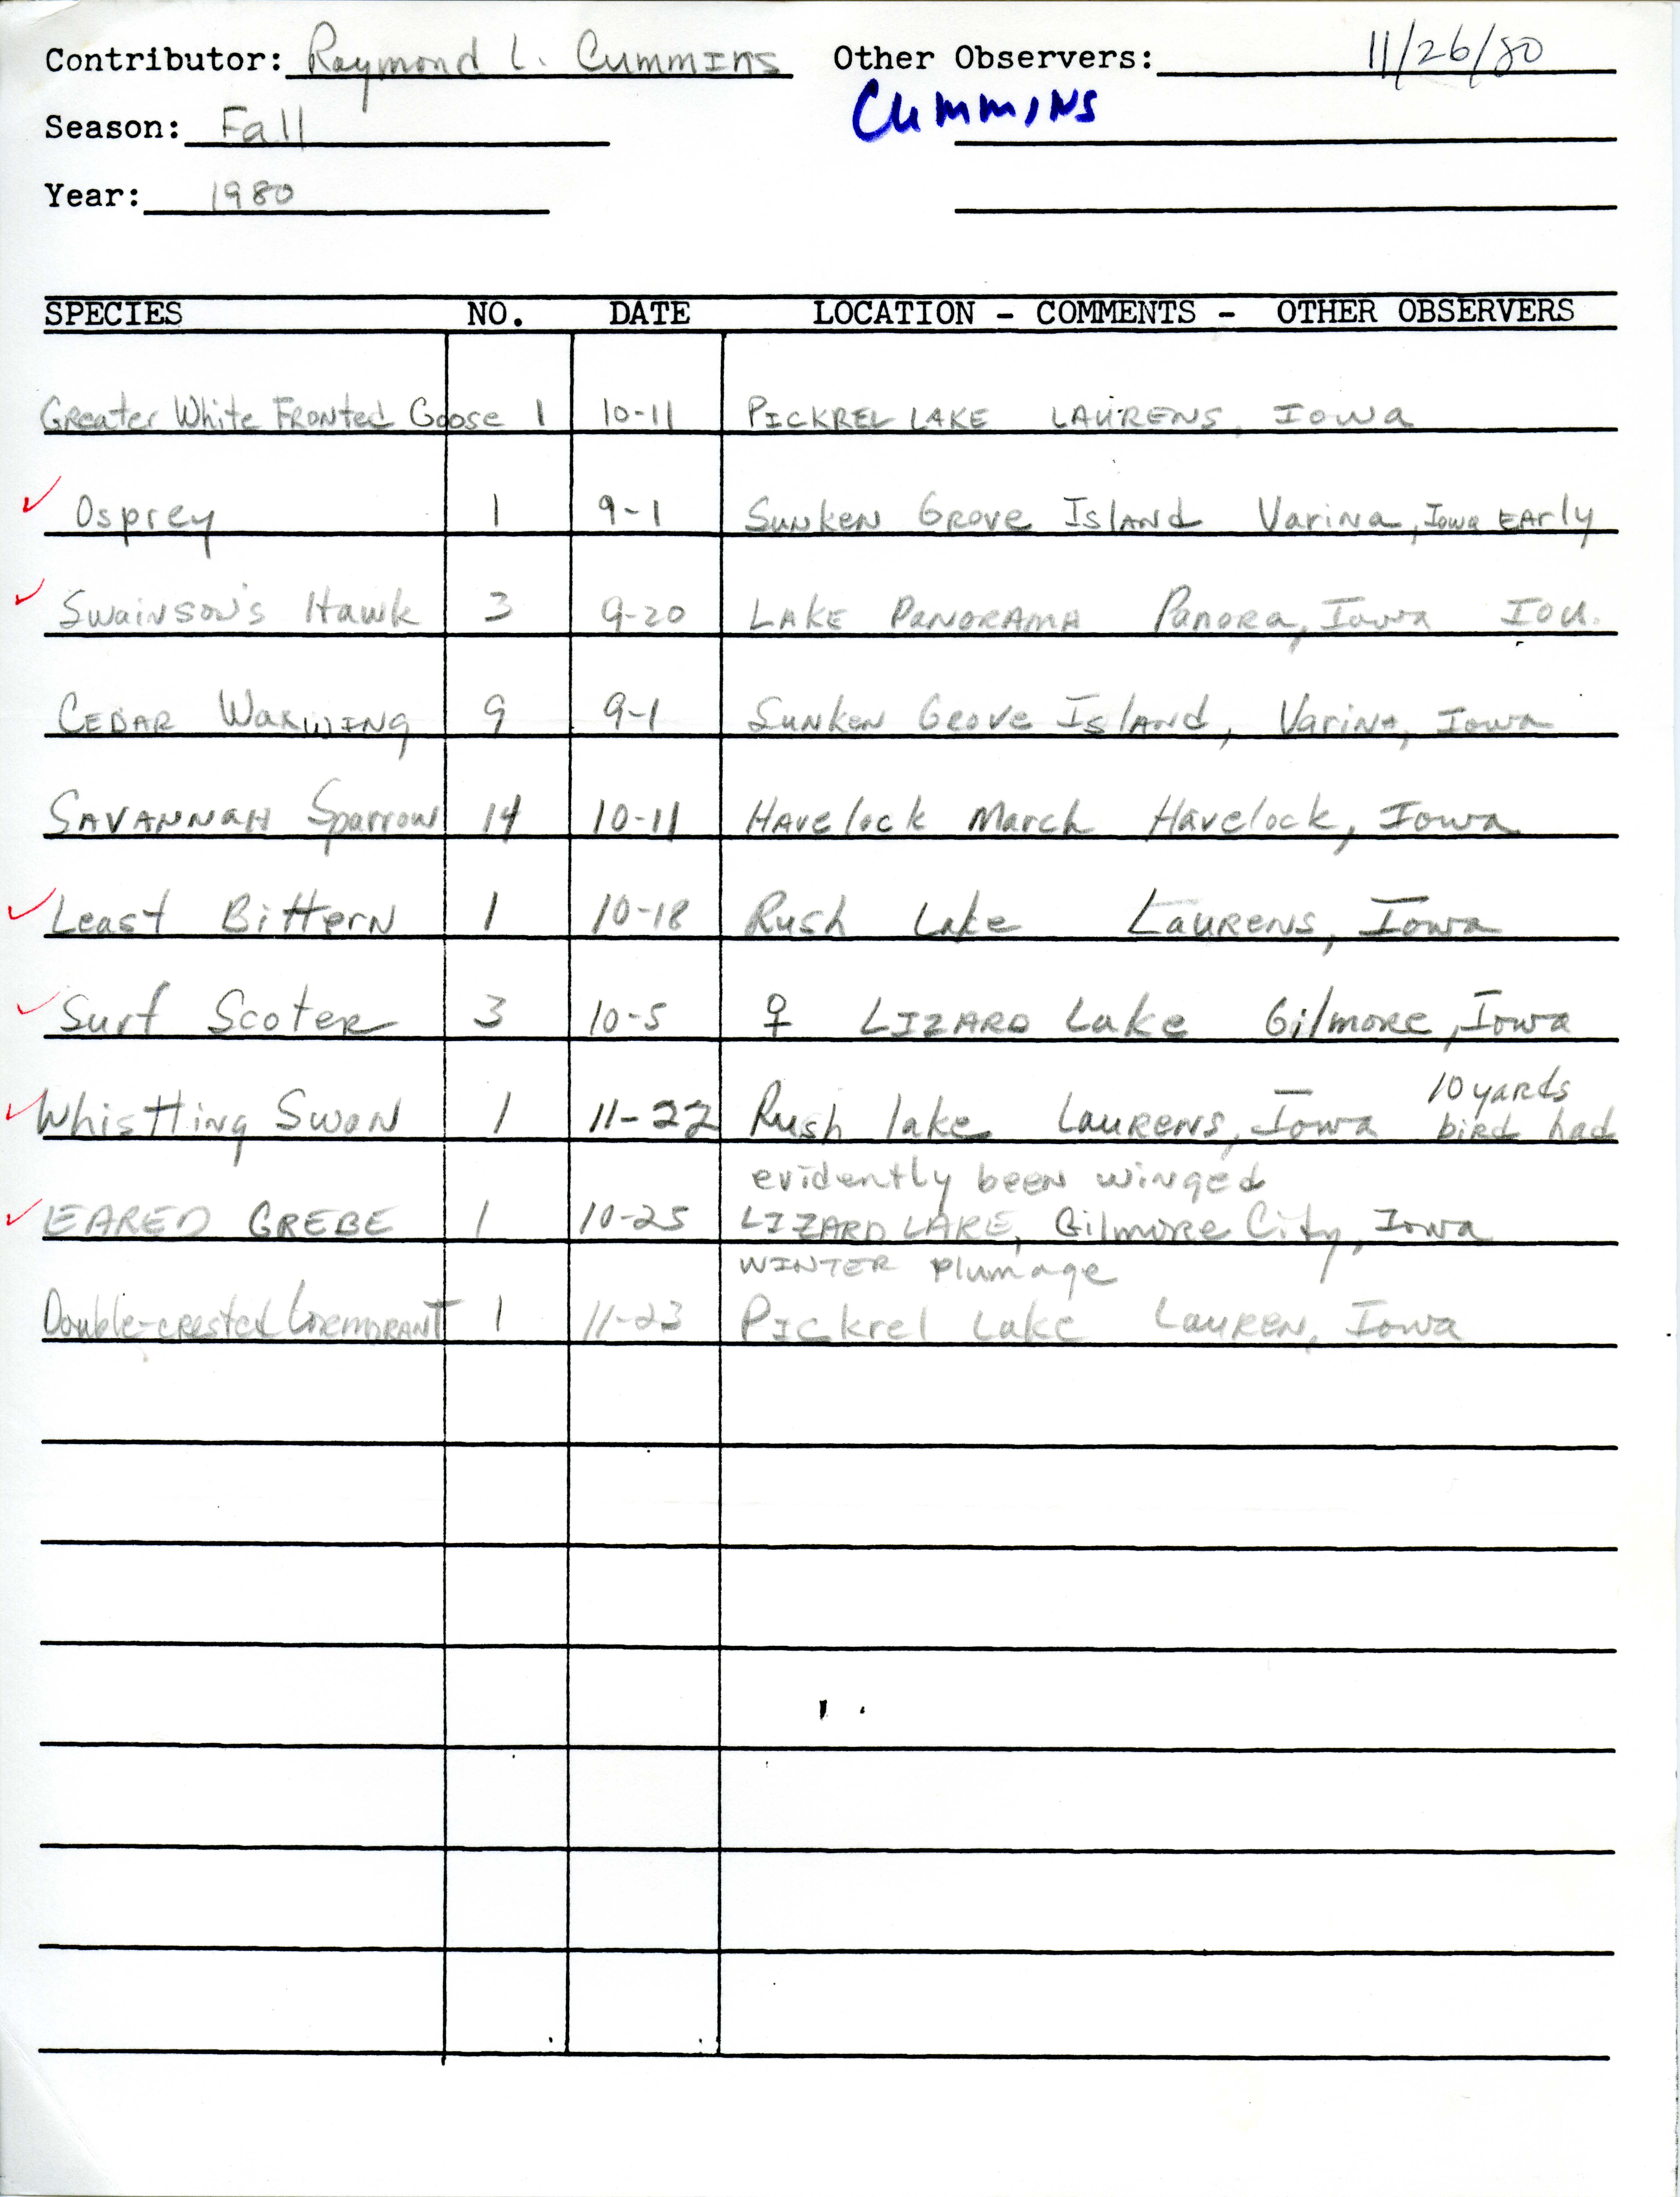 Annotated bird sighting list, Fall 1980 compiled by Raymond L. Cummins